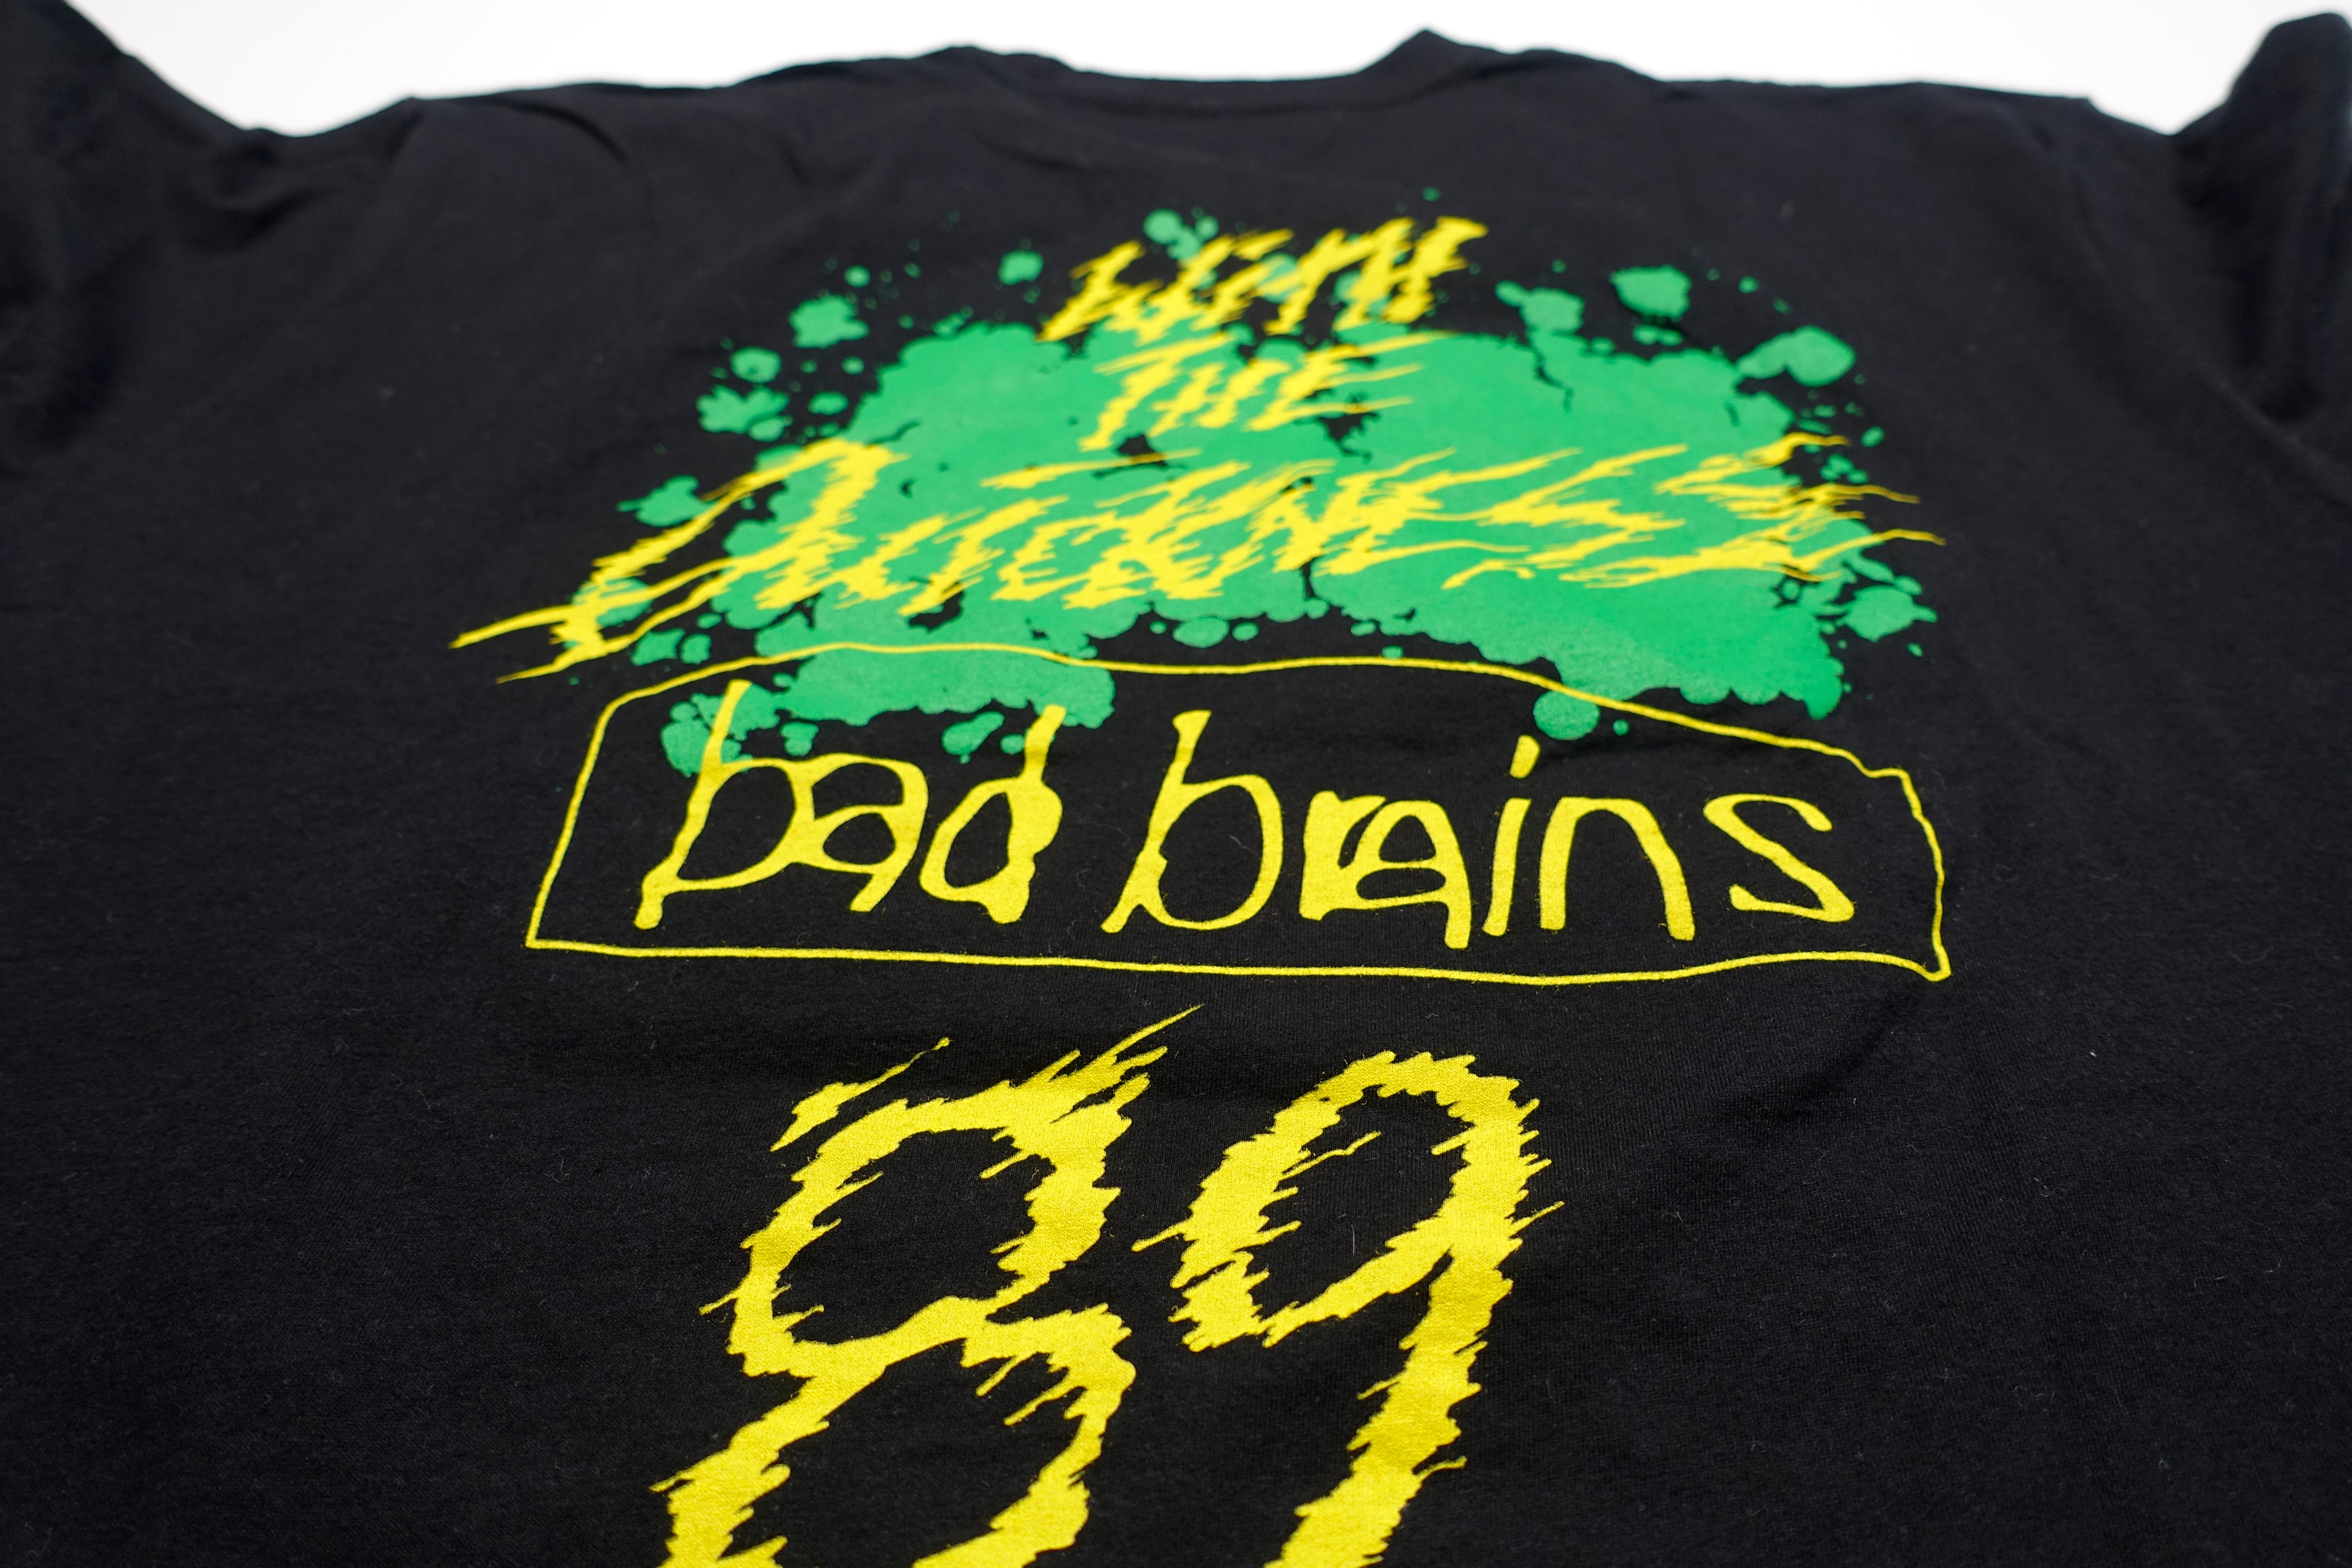 Bad Brains - With The Quickness 89 Tour Official Re-issue XL Shirt (Black)